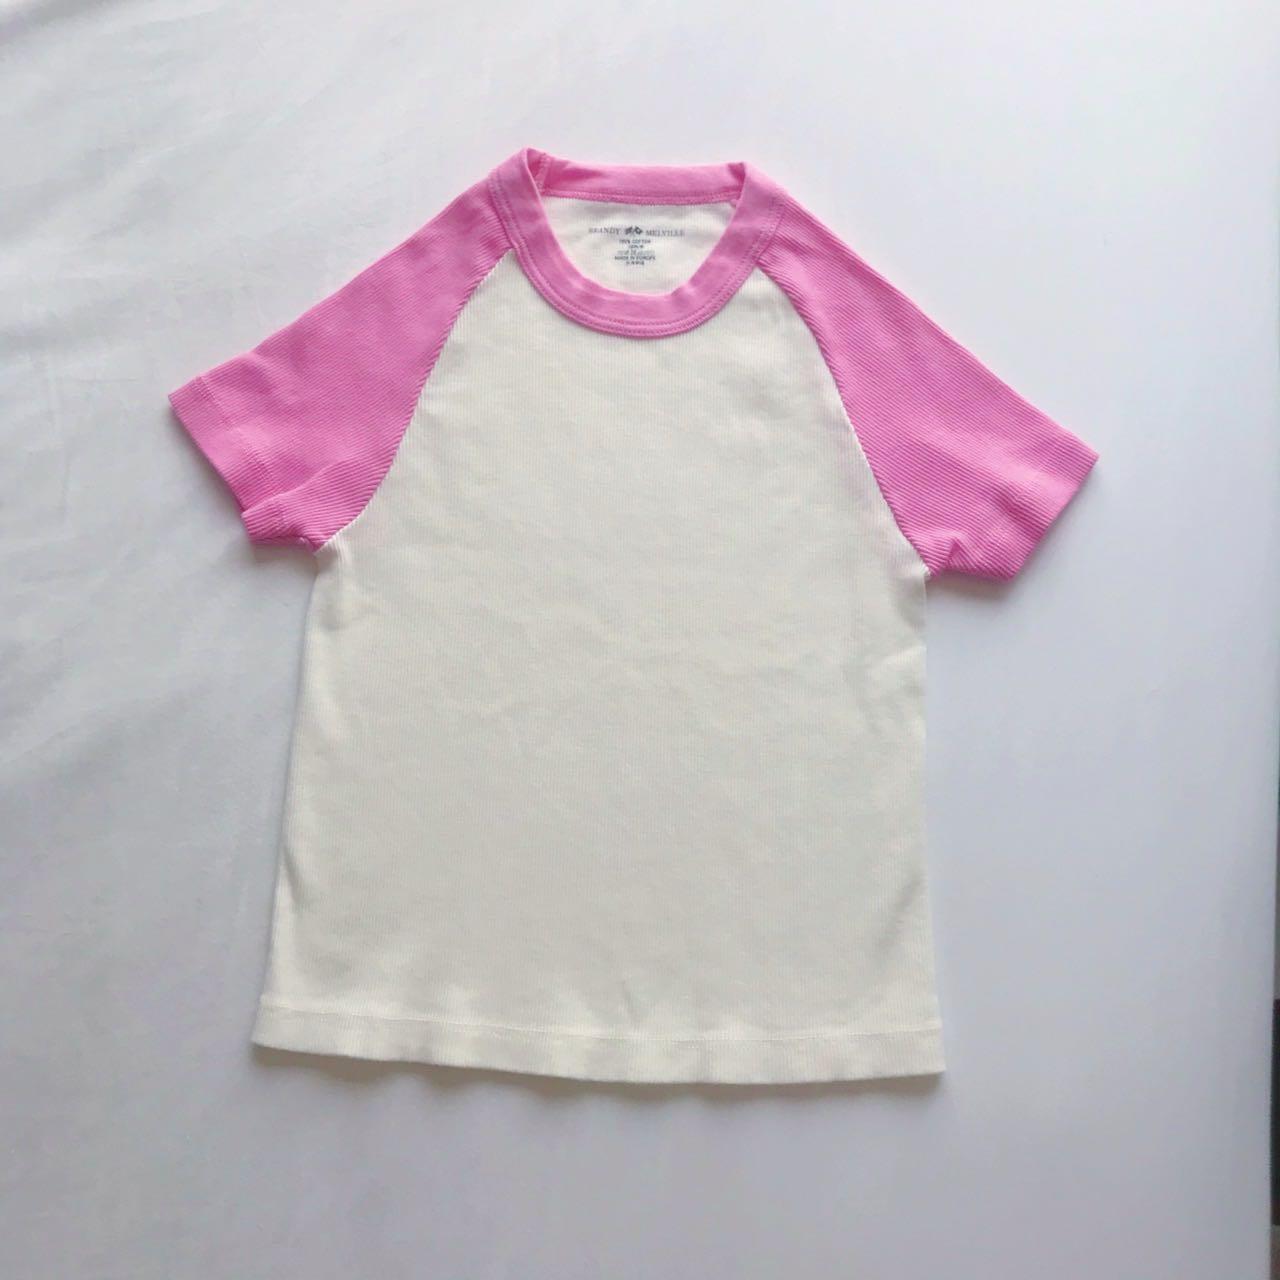 Brandy Melville Bella Top Bubblegum Pink Ribbed Pastel Baseball White Tee Women S Fashion Tops Other Tops On Carousell